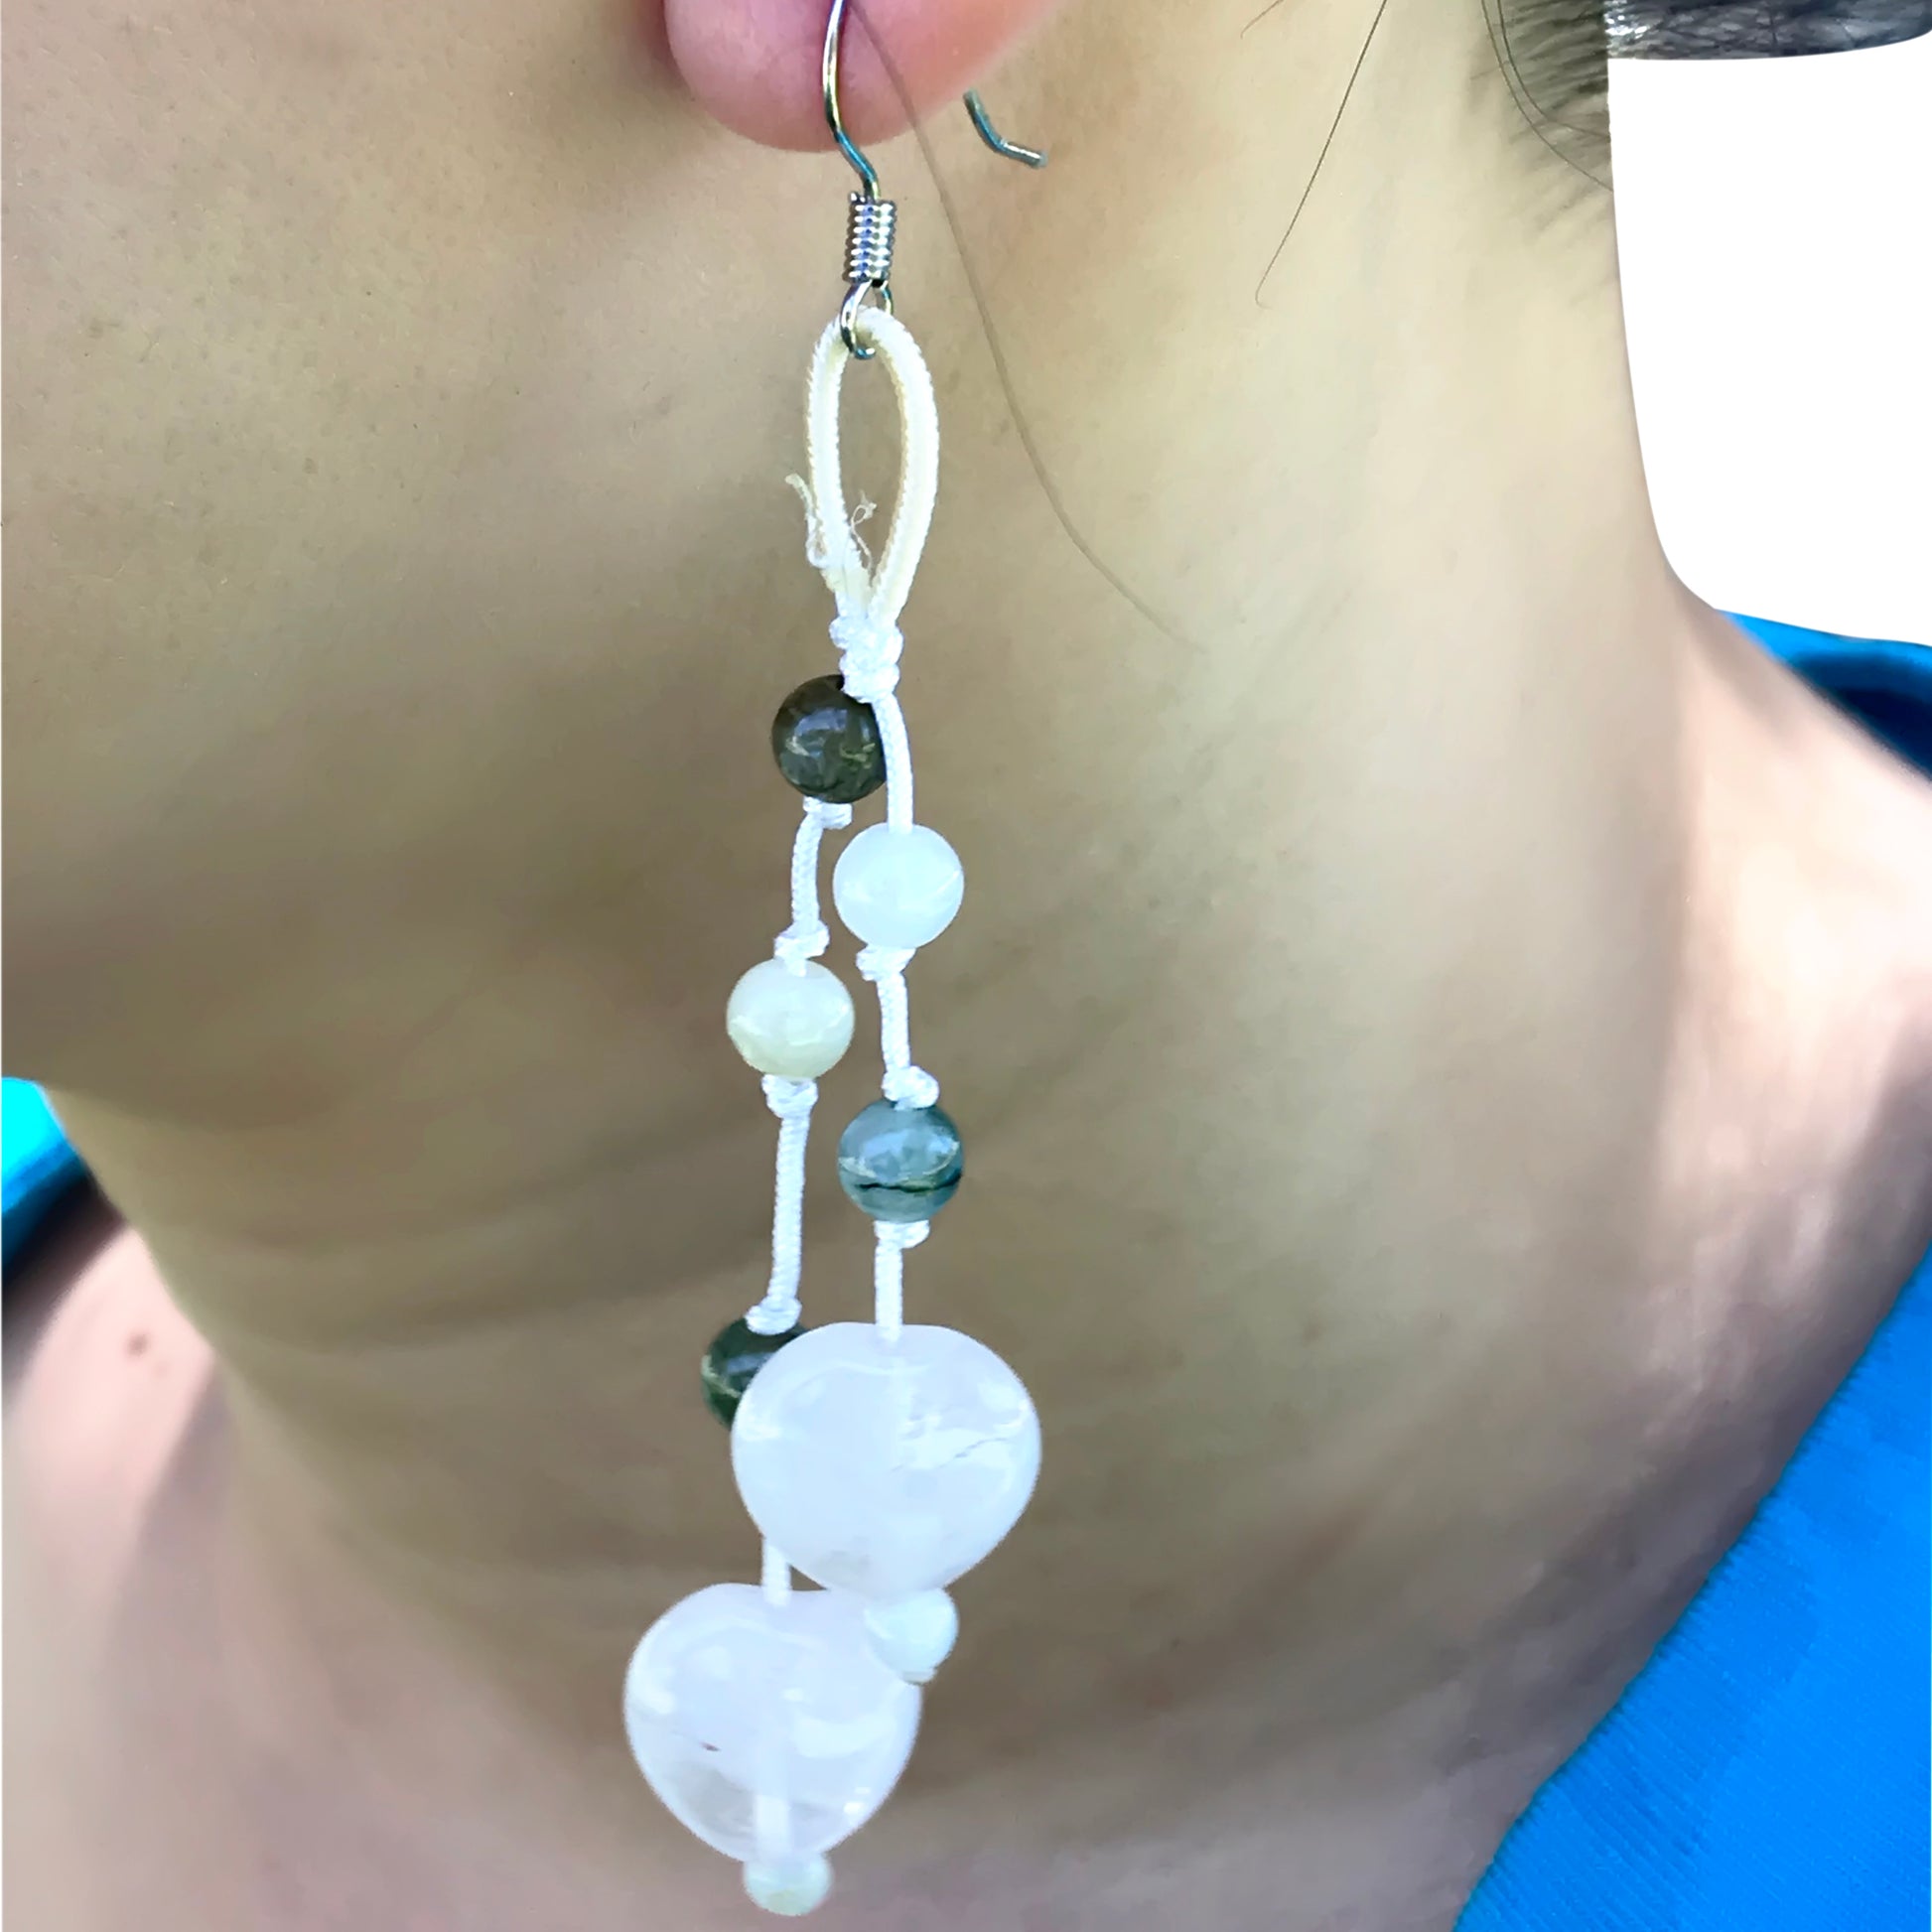 Show Off Your Style with Rose Quartz Heart Earrings made with White Cord